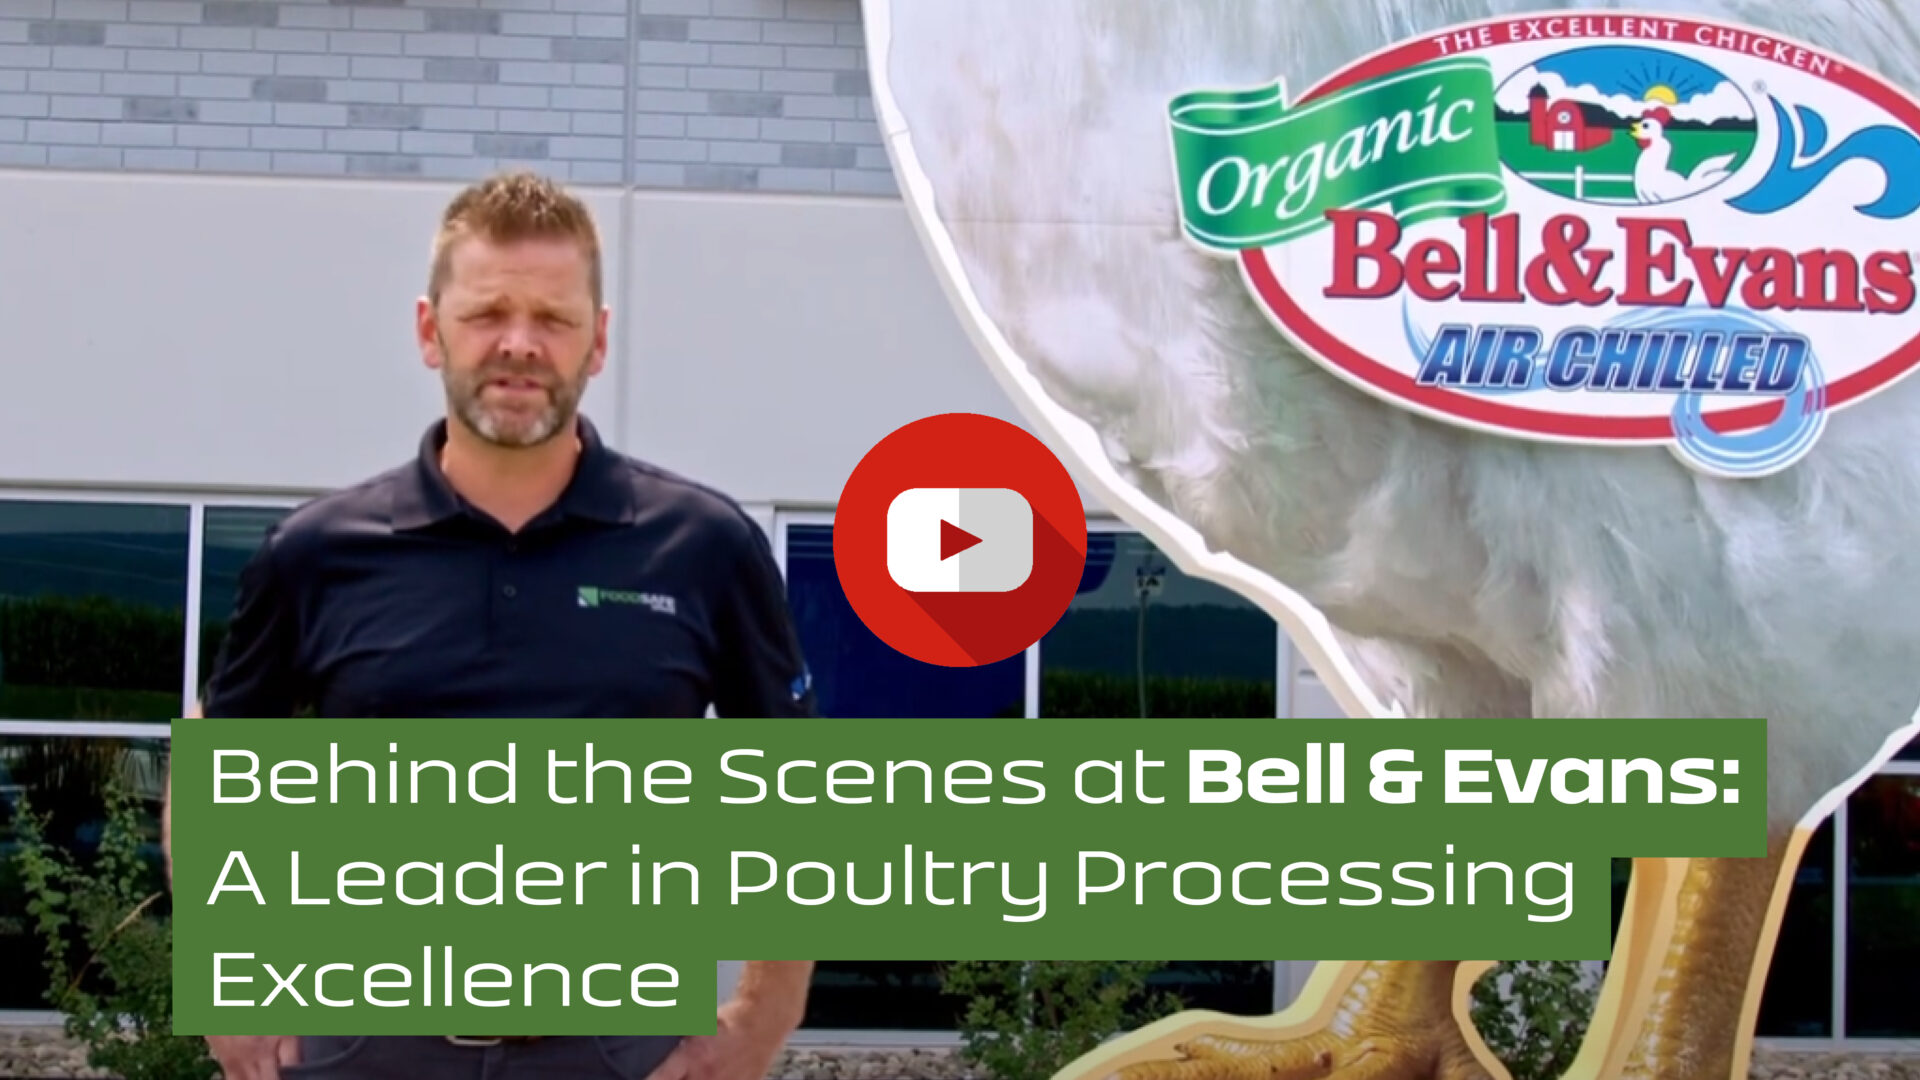 Behind the Scenes at Bell & Evans: A Leader in Poultry Processing Excellence